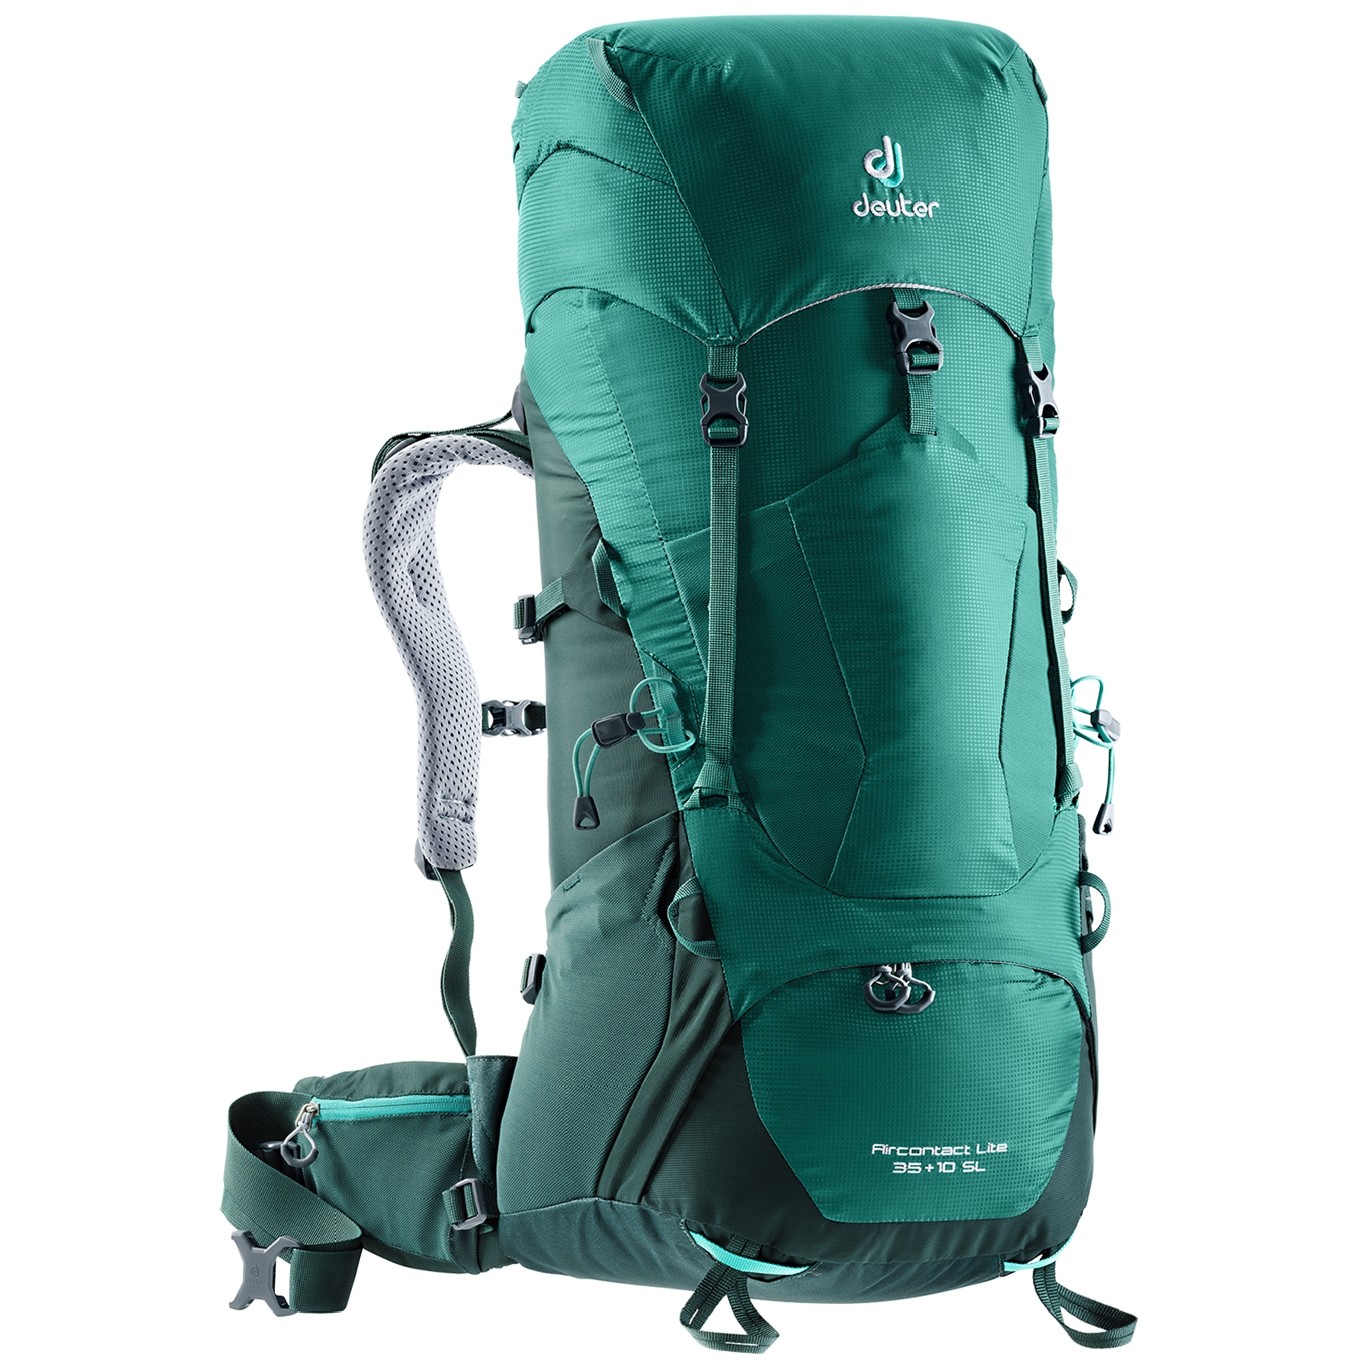 Deuter Aircontact Lite 35+10 SL Backpack alpinegreen - forest backpack